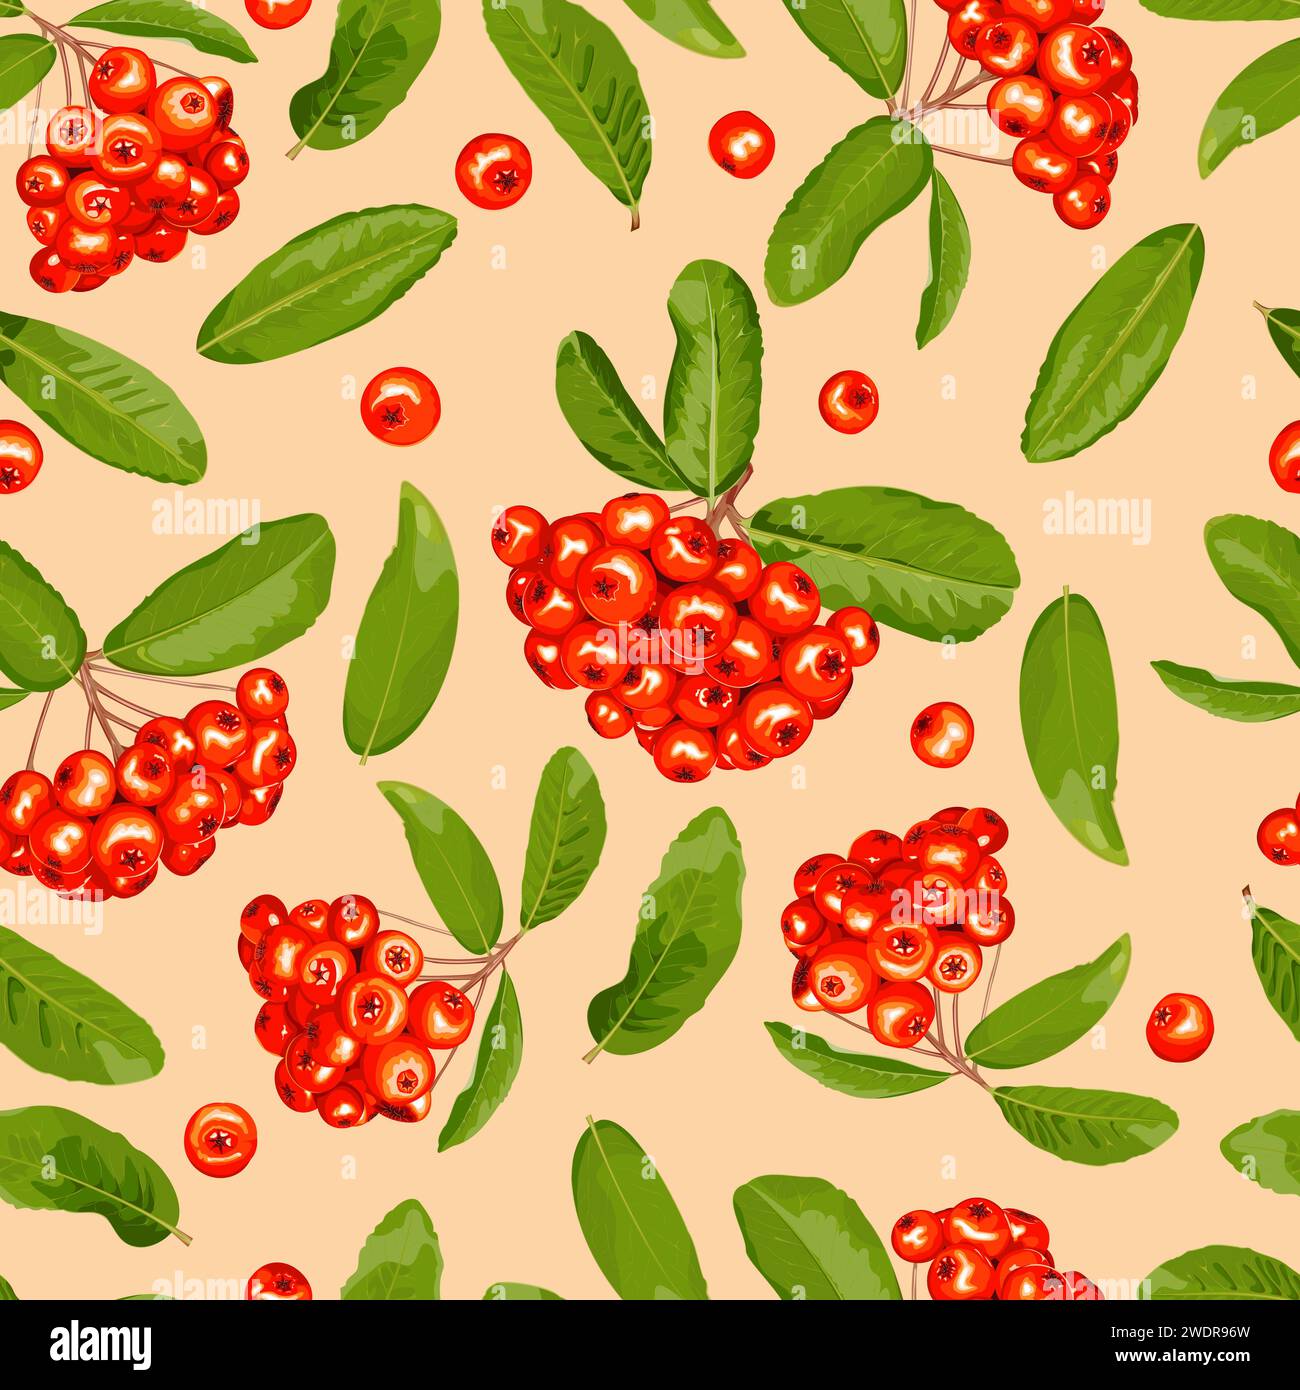 Seamless pattern of pyracantha fruits and leaves on a beige background Stock Vector